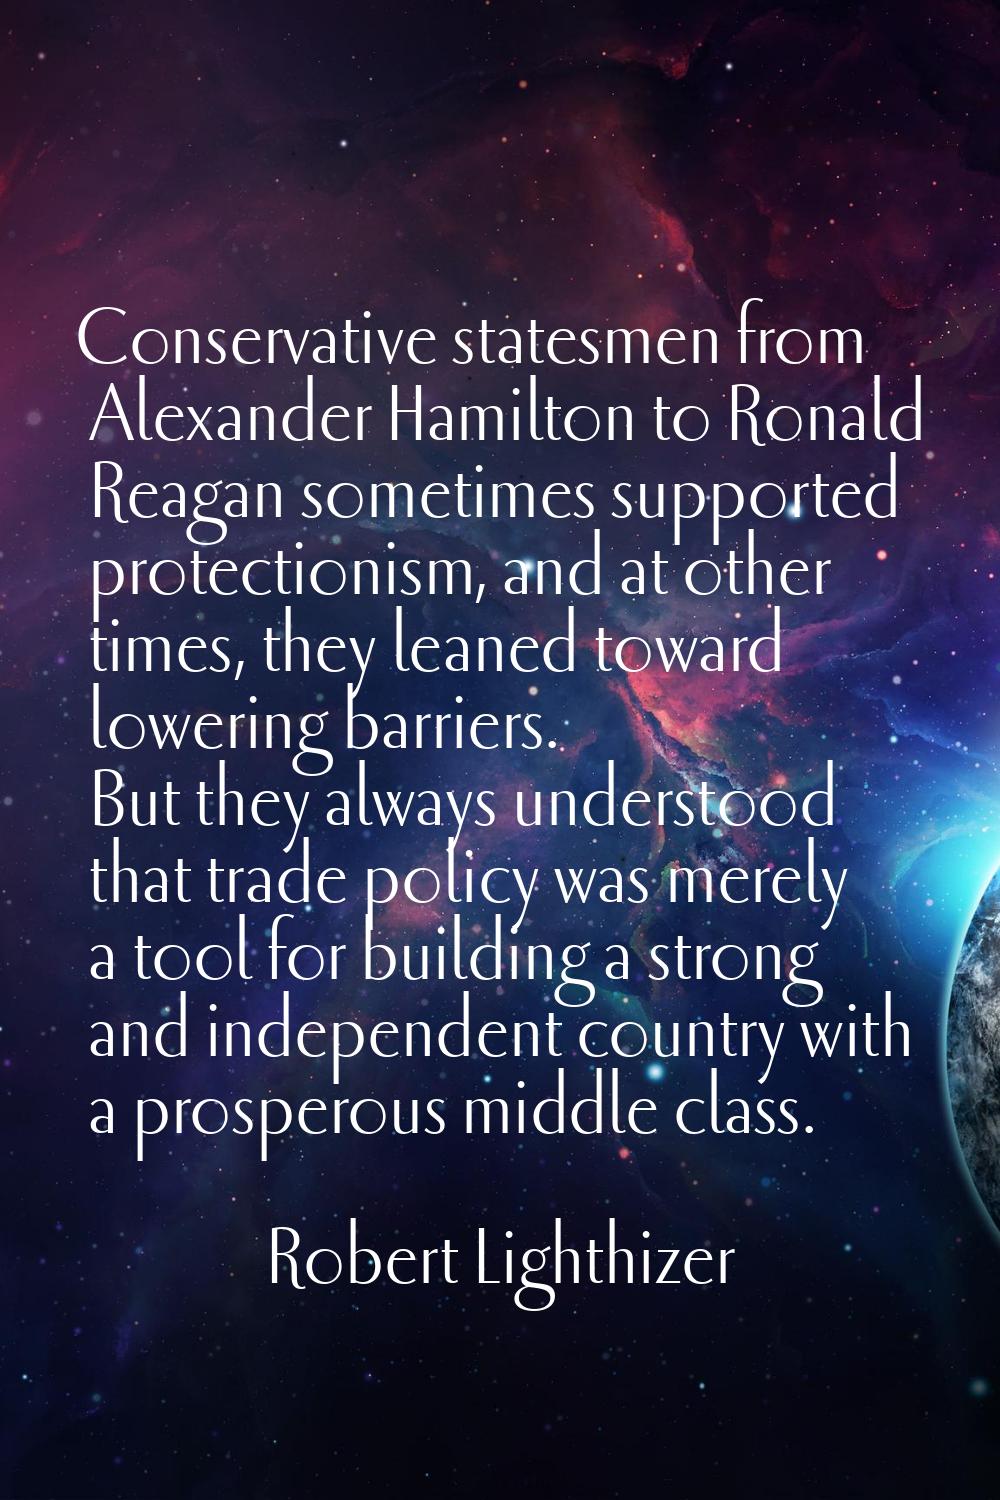 Conservative statesmen from Alexander Hamilton to Ronald Reagan sometimes supported protectionism, 